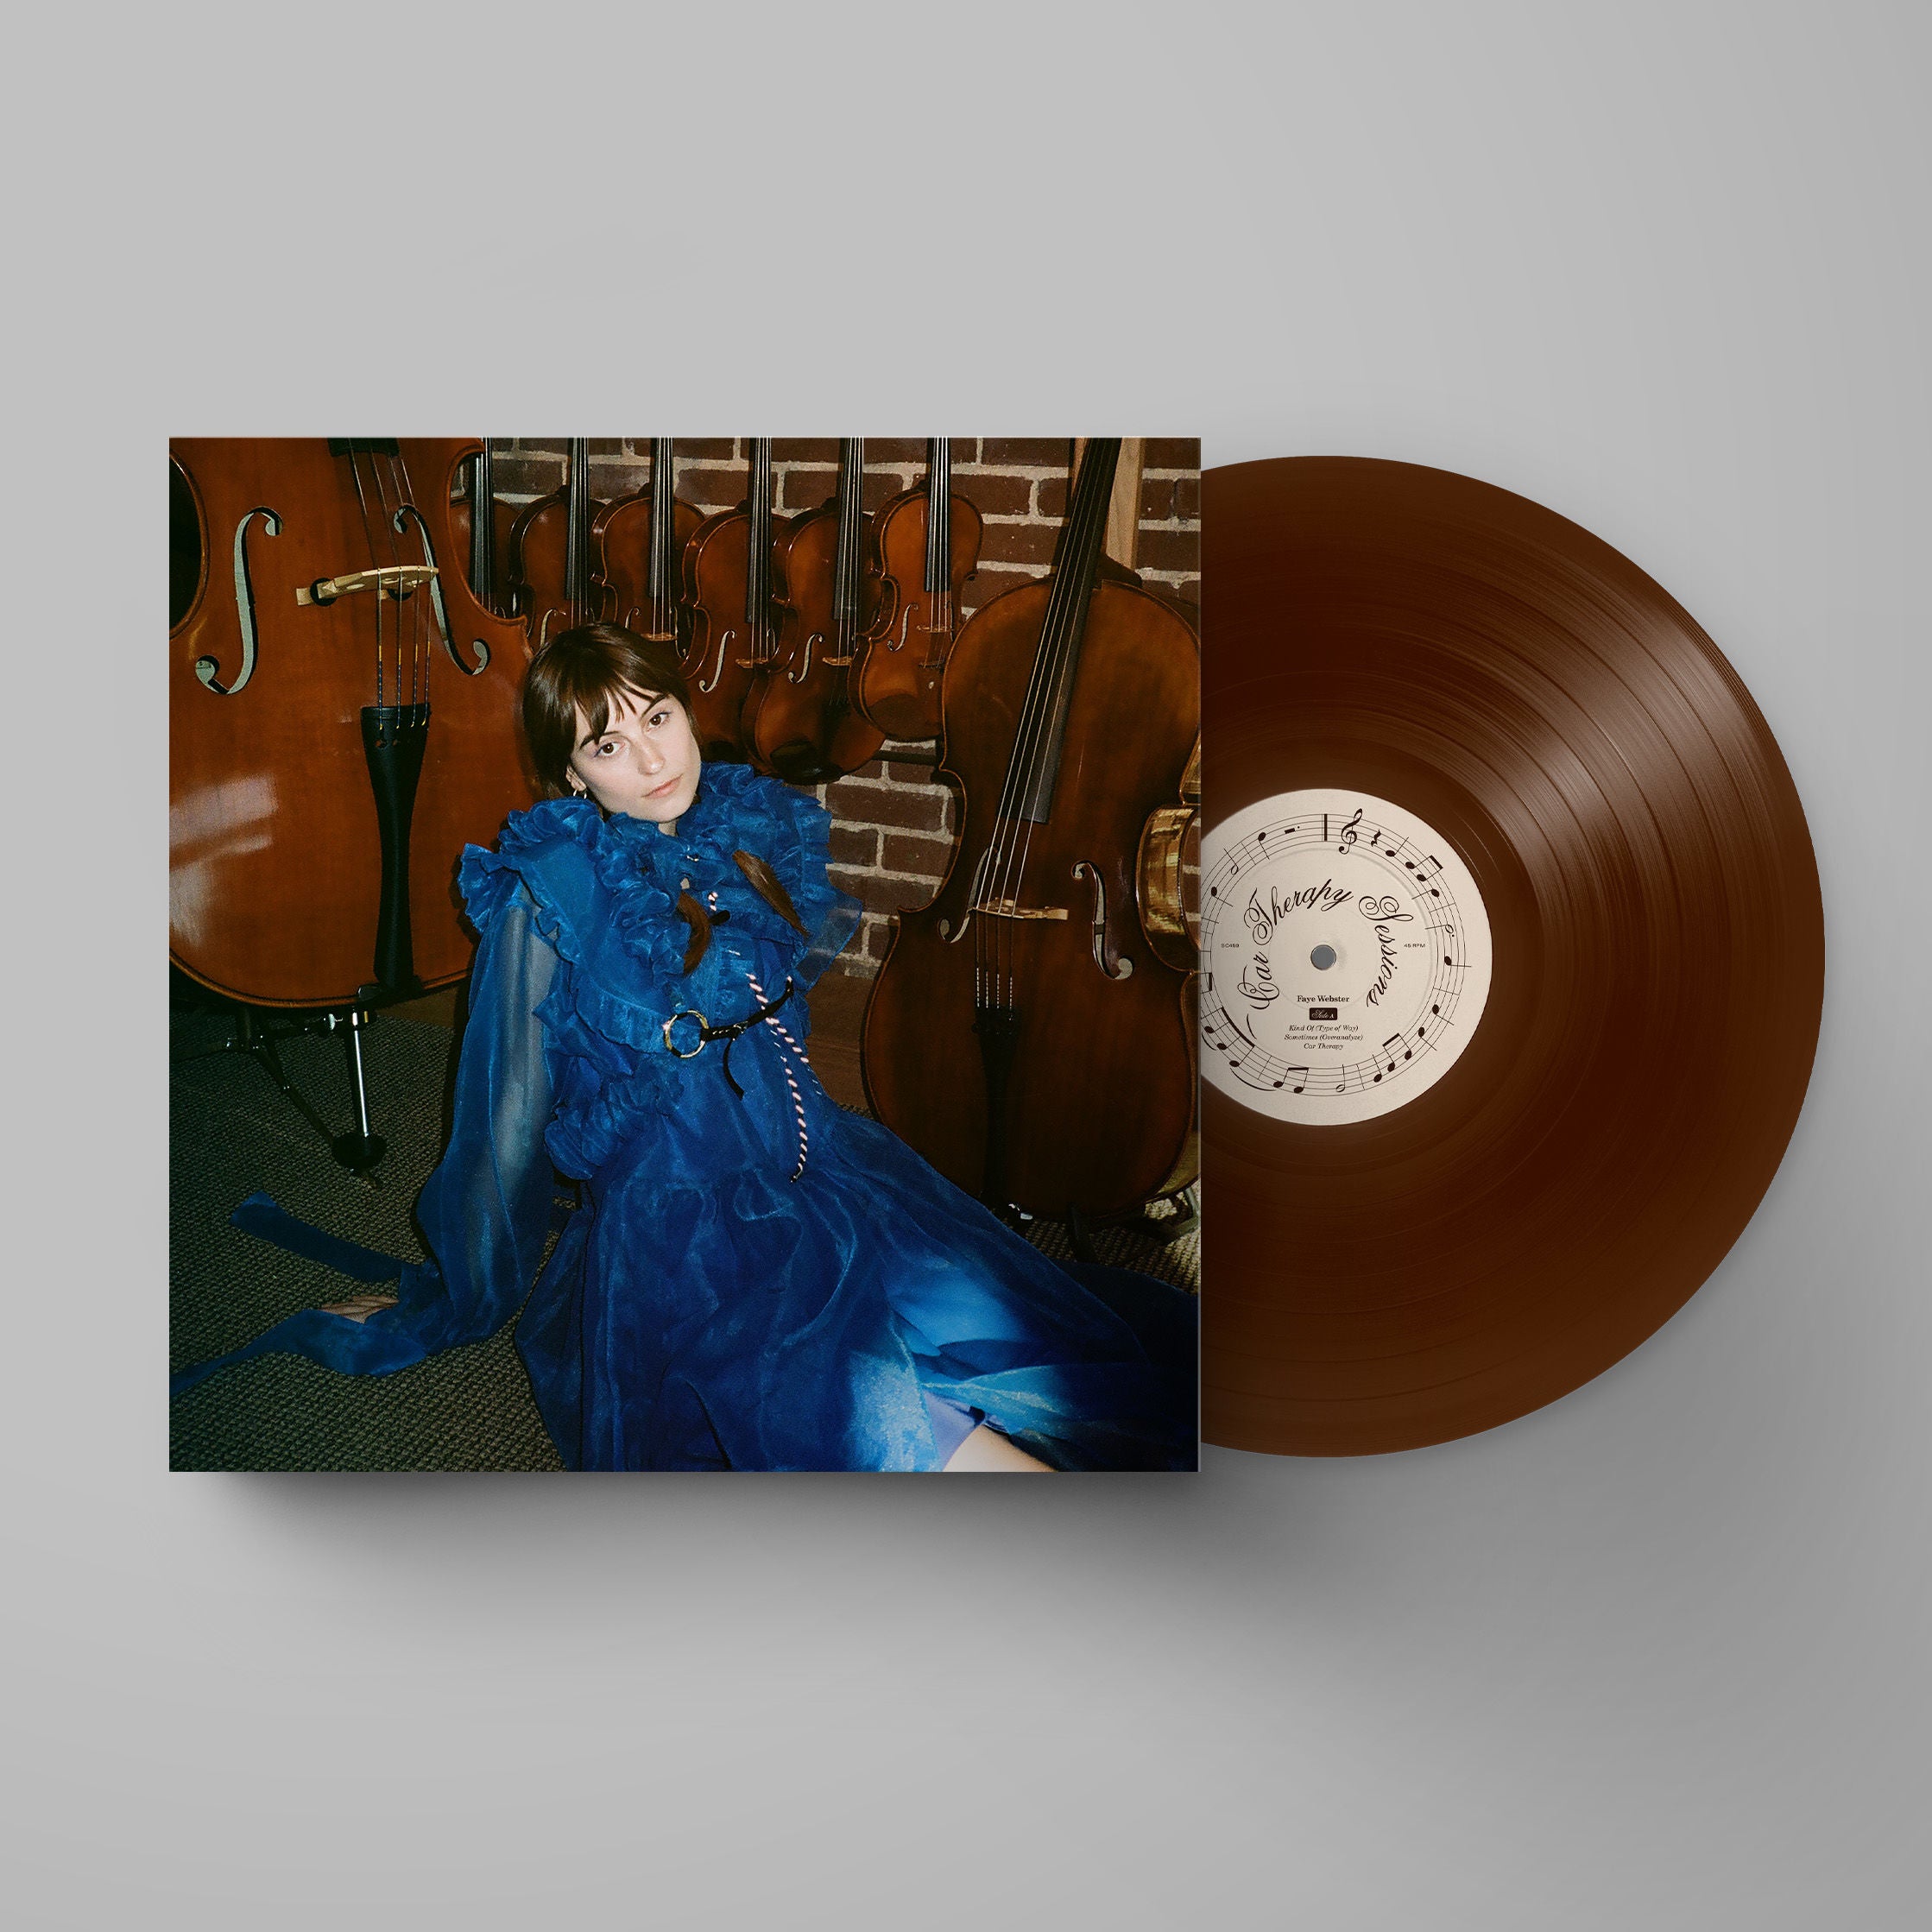 Car Therapy Sessions: Limited Walnut Brown Vinyl LP